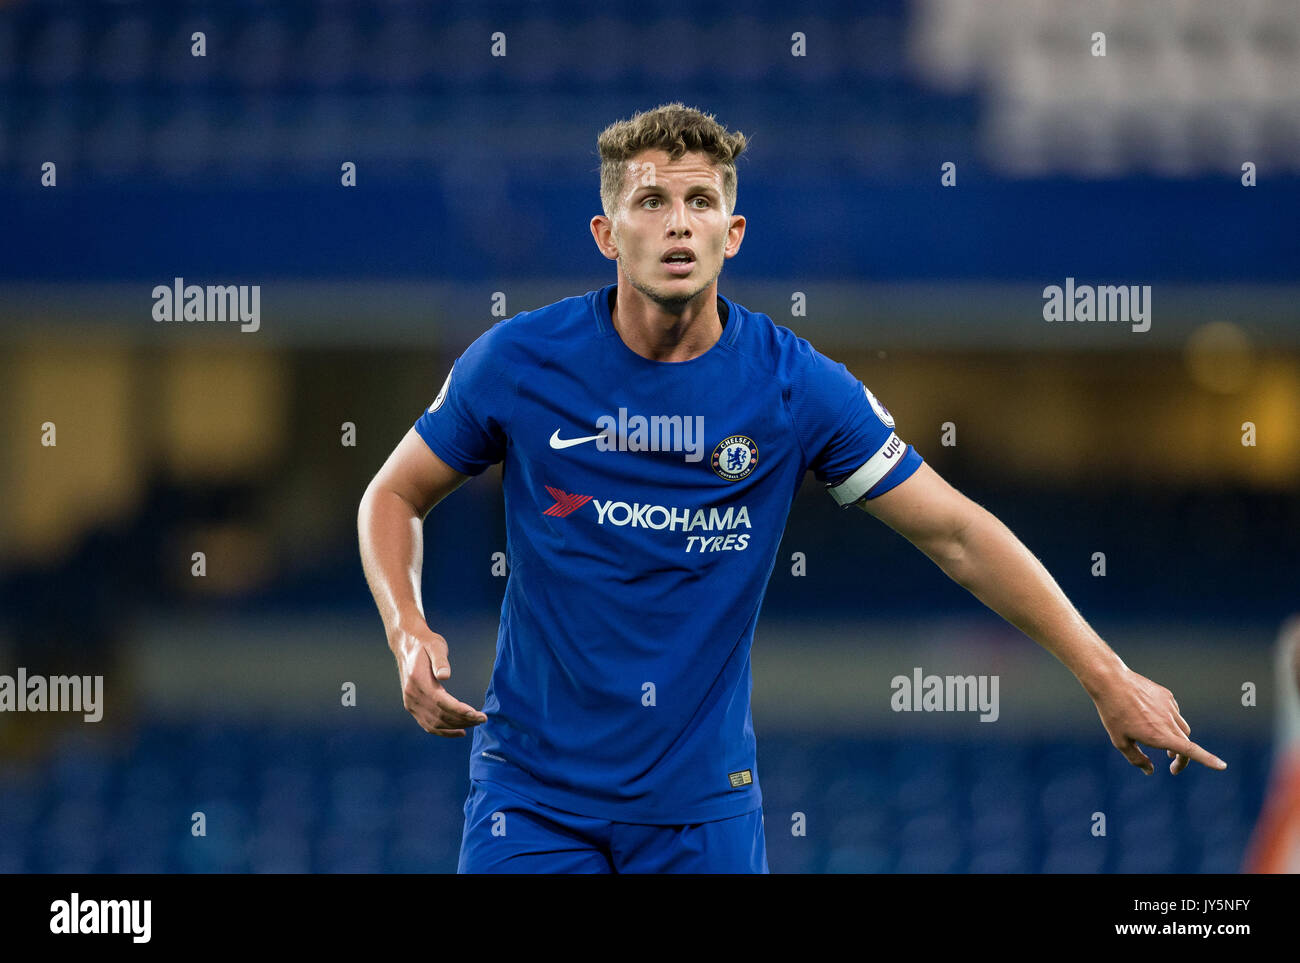 London, UK. 18th Aug, 2017.  London, UK. 18th Aug, 2017. Jordan HOUGHTON of Chelsea wears the captains armband as he comes on off the bench in his comeback from injury during the U23 Premier League 2 match between Chelsea and Derby County at Stamford Bridge, London, England on 18 August 2017. Photo by Andy Rowland. **EDITORIAL USE ONLY FA Premier League and Football League are subject to DataCo Licence. Credit: Andrew Rowland/Alamy Live News Credit: Andrew Rowland/Alamy Live News Stock Photo